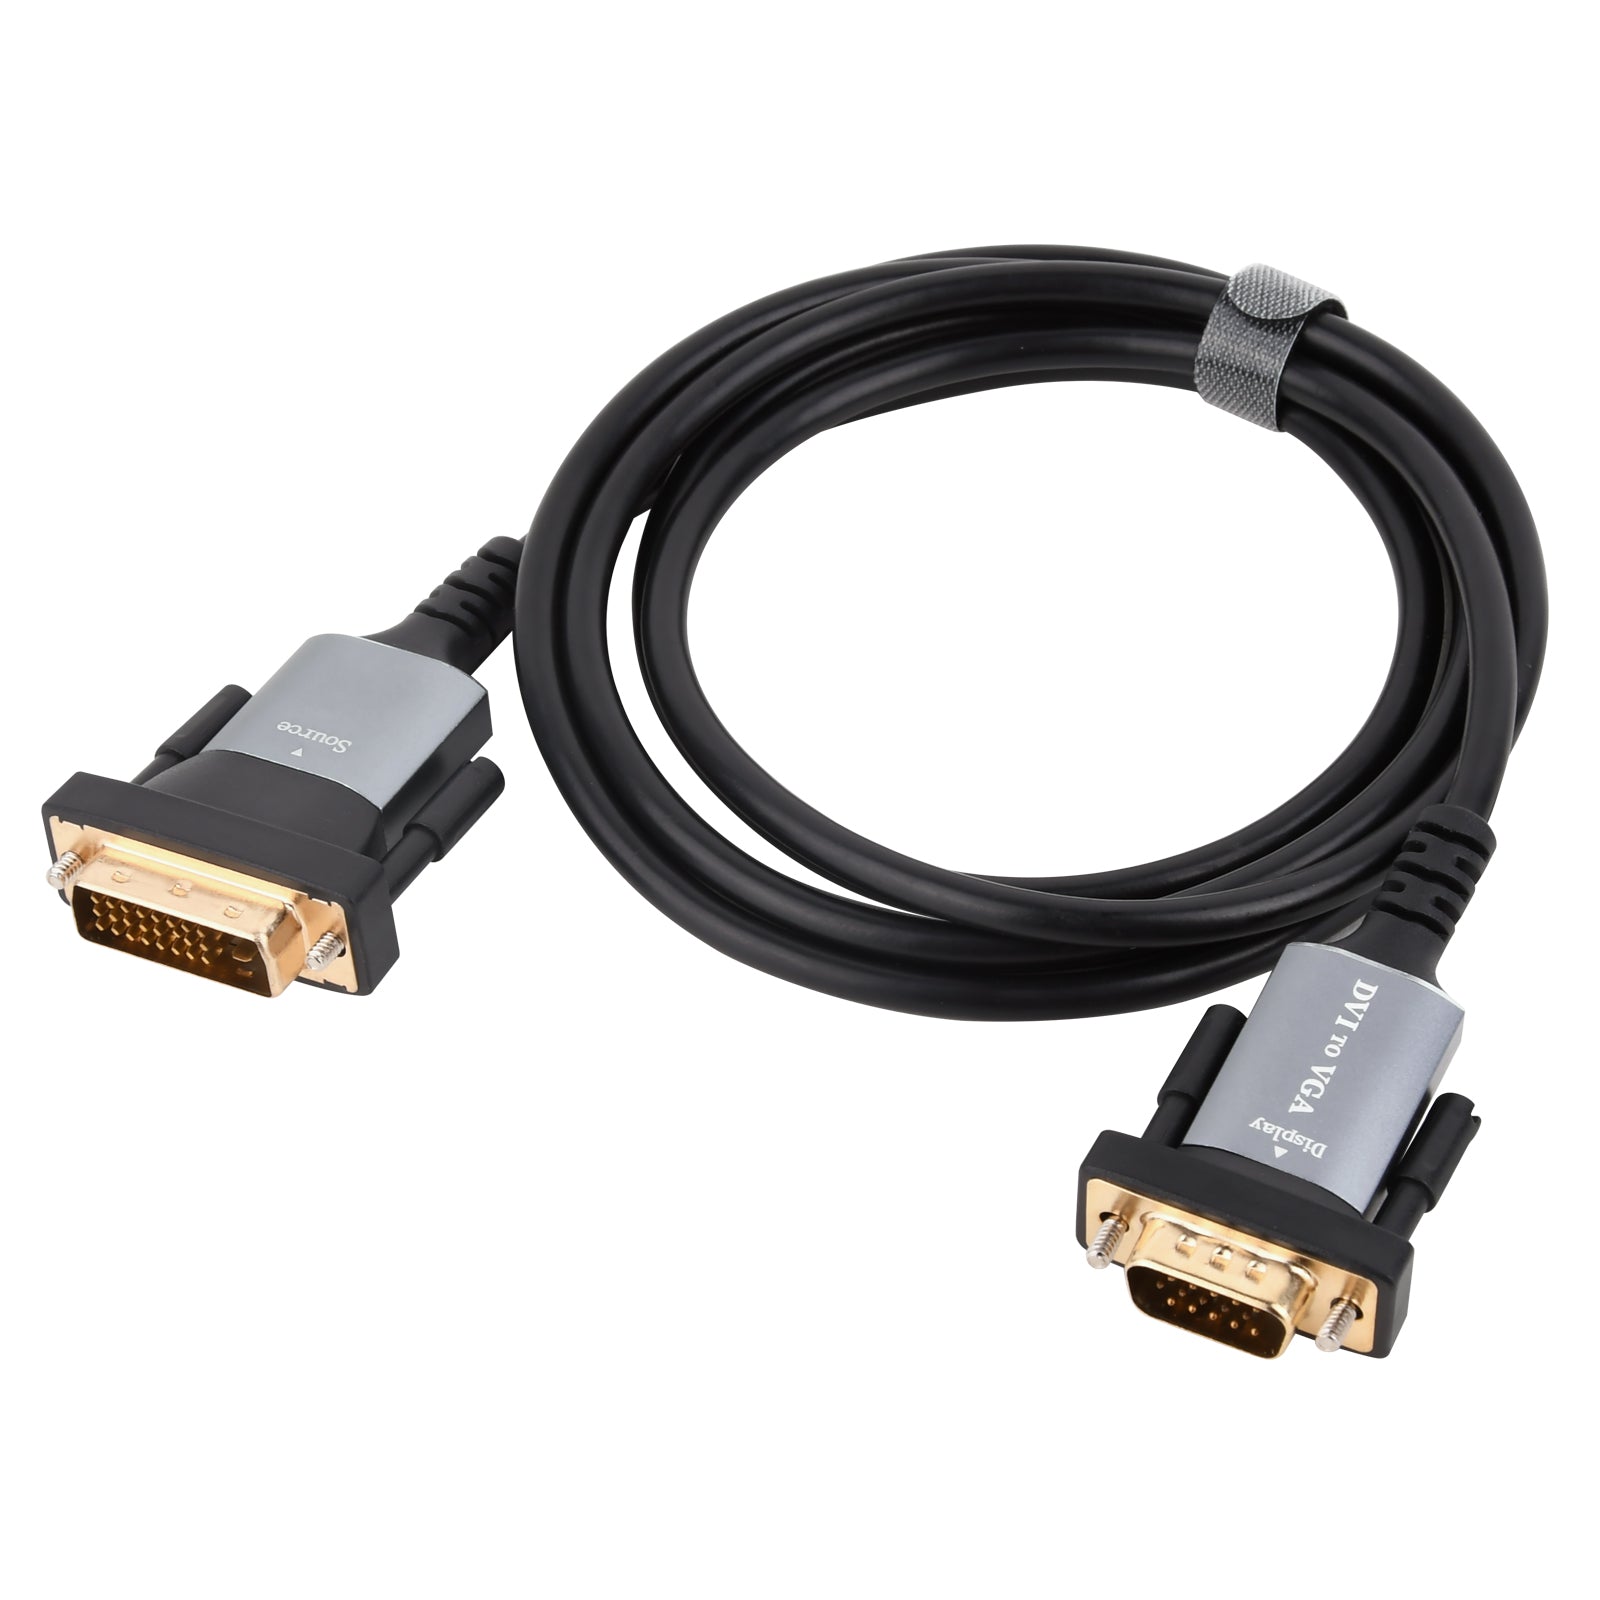 DVI-I (24+5 pin) Male to VGA 15 Pin Male Video Cable 1.8m